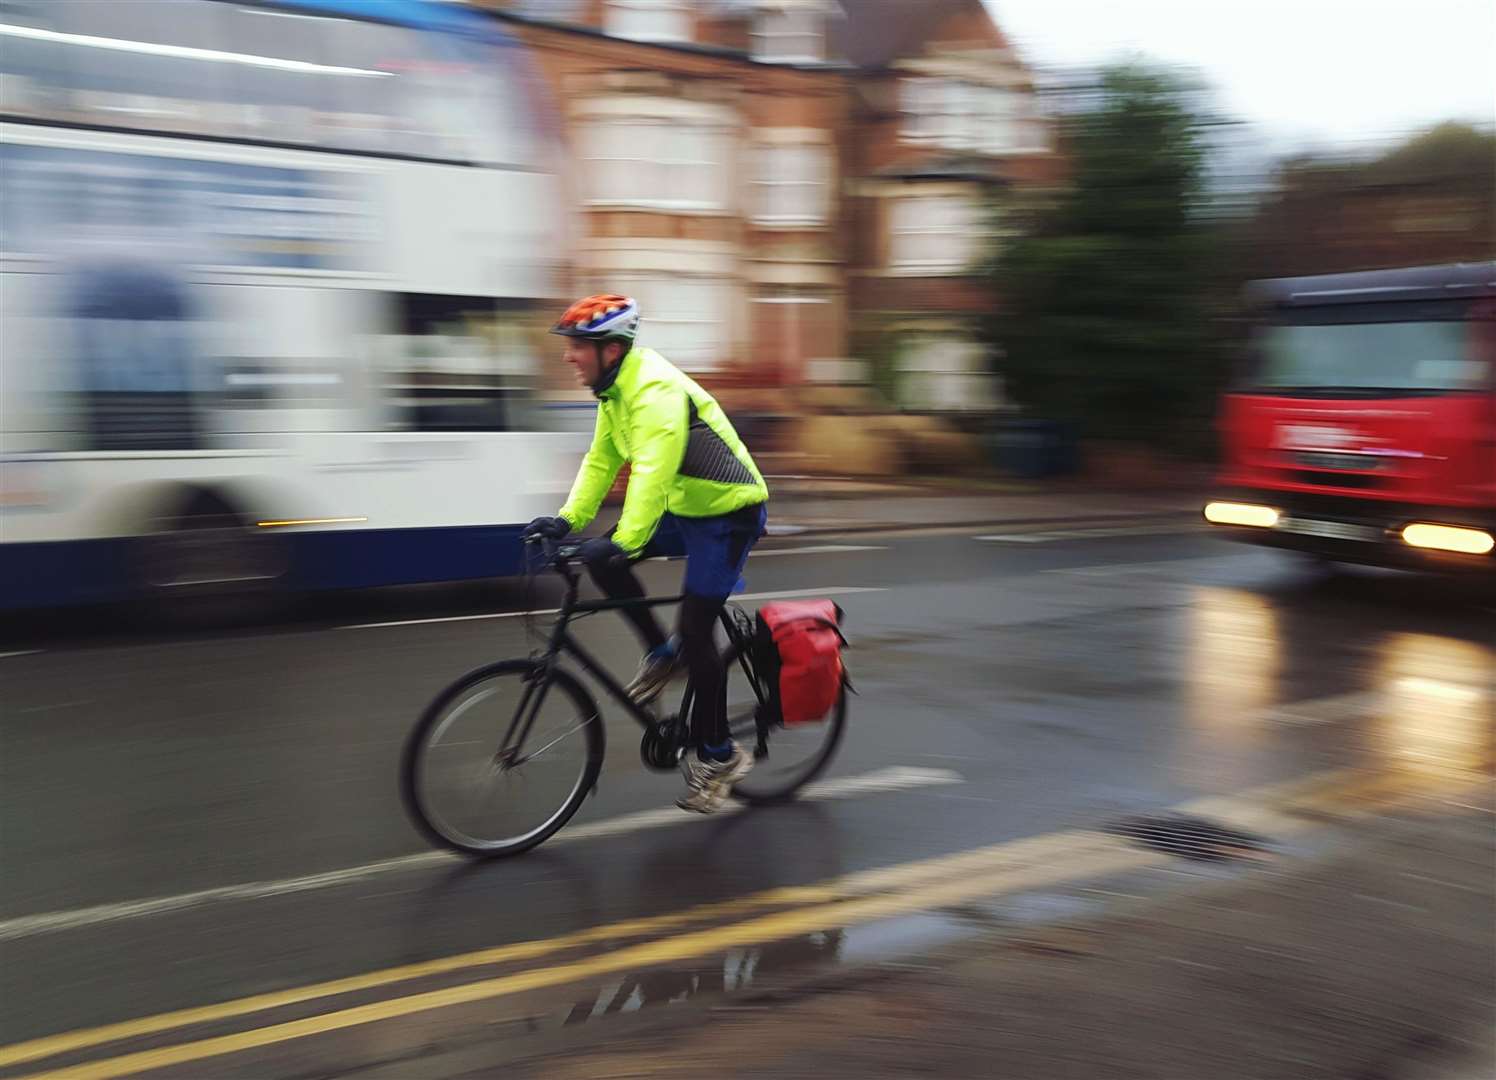 Drivers should allow sufficent time and distance to pass a cyclist without compromising their safety.